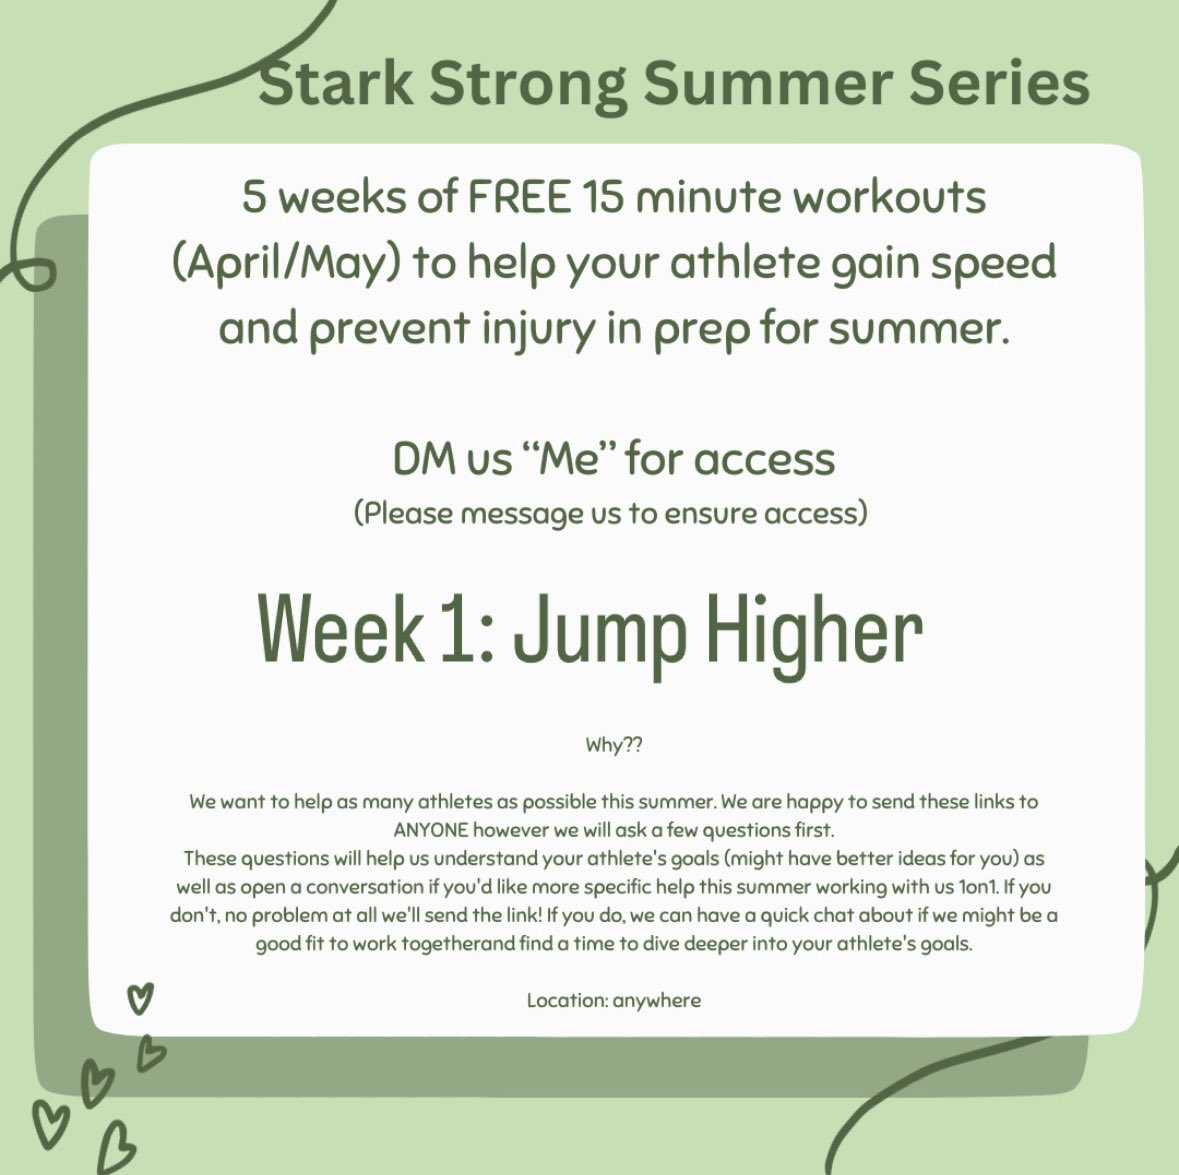 Summer is around the corner but our 5 weeks of FREE 15 minute workouts (April/May) to help your athlete gain speed and prevent injury in prep for summer is HERE NOW. DM “me” for access We offer a FREE Gap program to any athlete committed to join our 12 or 8 week Mentorship early